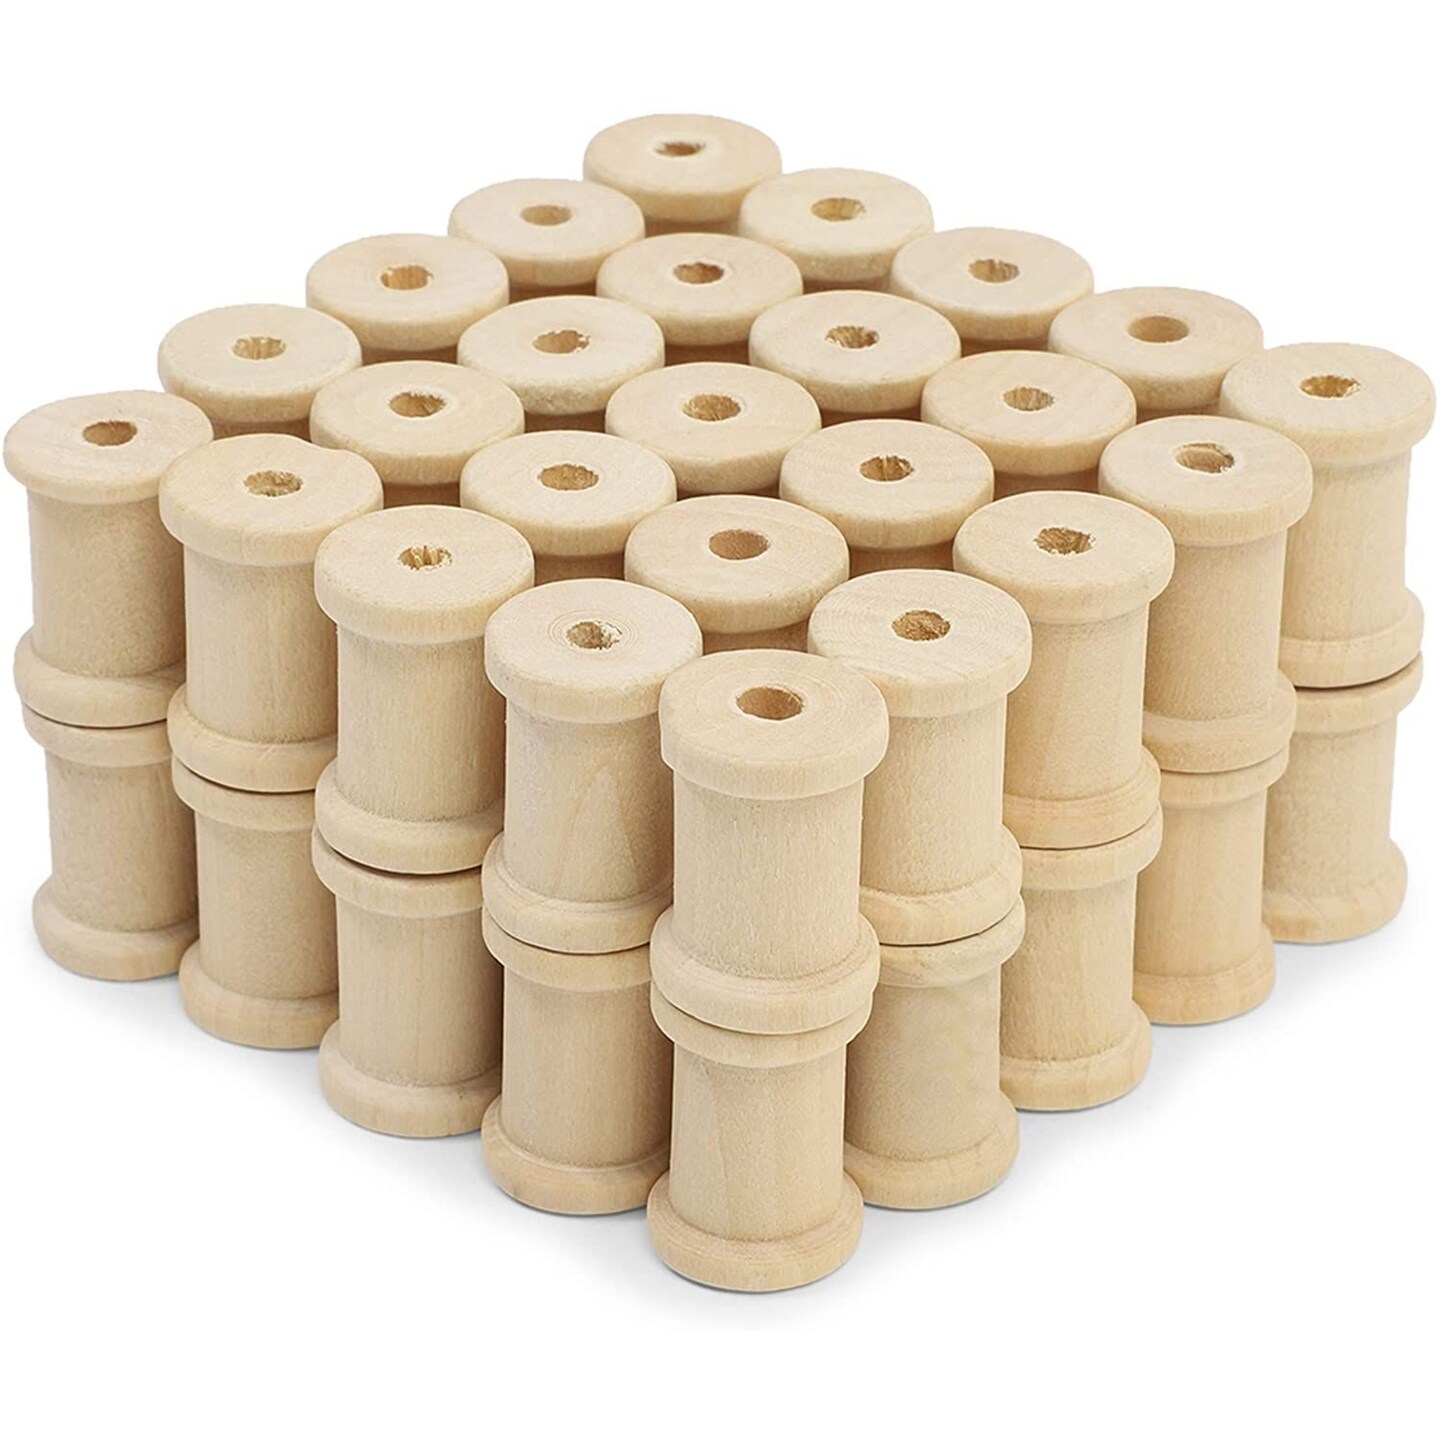 WOPPLXY 20 Pcs Wooden Thread Spools for Crafts, 1.2 x 2.7 Inch Unfinished  Wooden Spool, Empty Thread Spools for Arts DIY Wood Projects, Wooden Craft